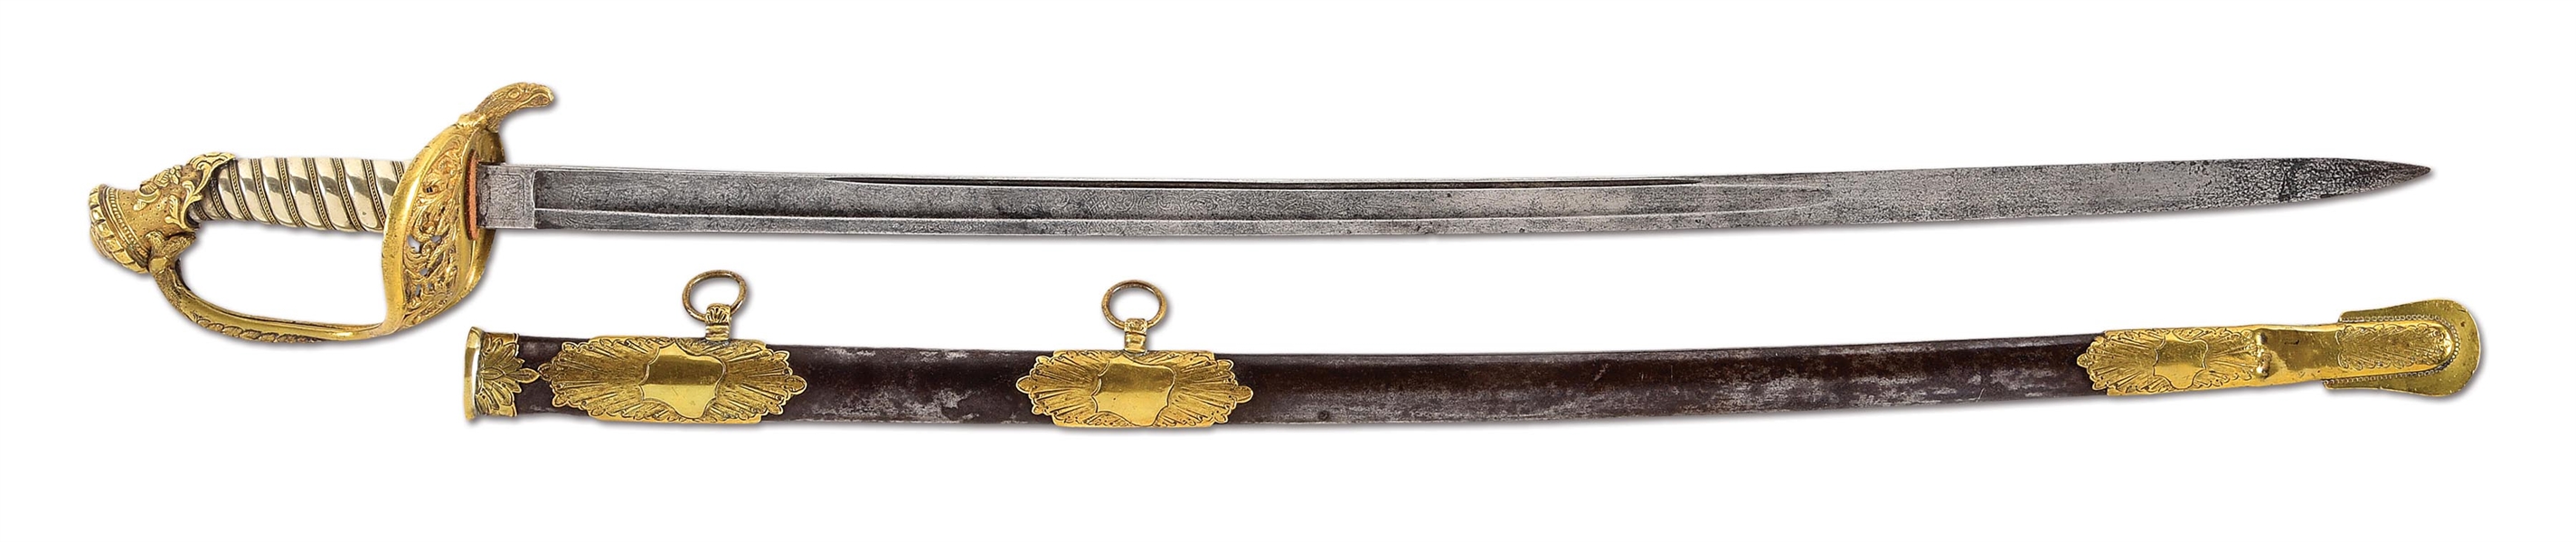 SWORD OF SURGEON GEORGE E. COOPER, MEDICAL DIRECTOR DEPARTMENT OF THE CUMBERLAND, PRISON PHYSICIAN TO JEFF DAVIS.